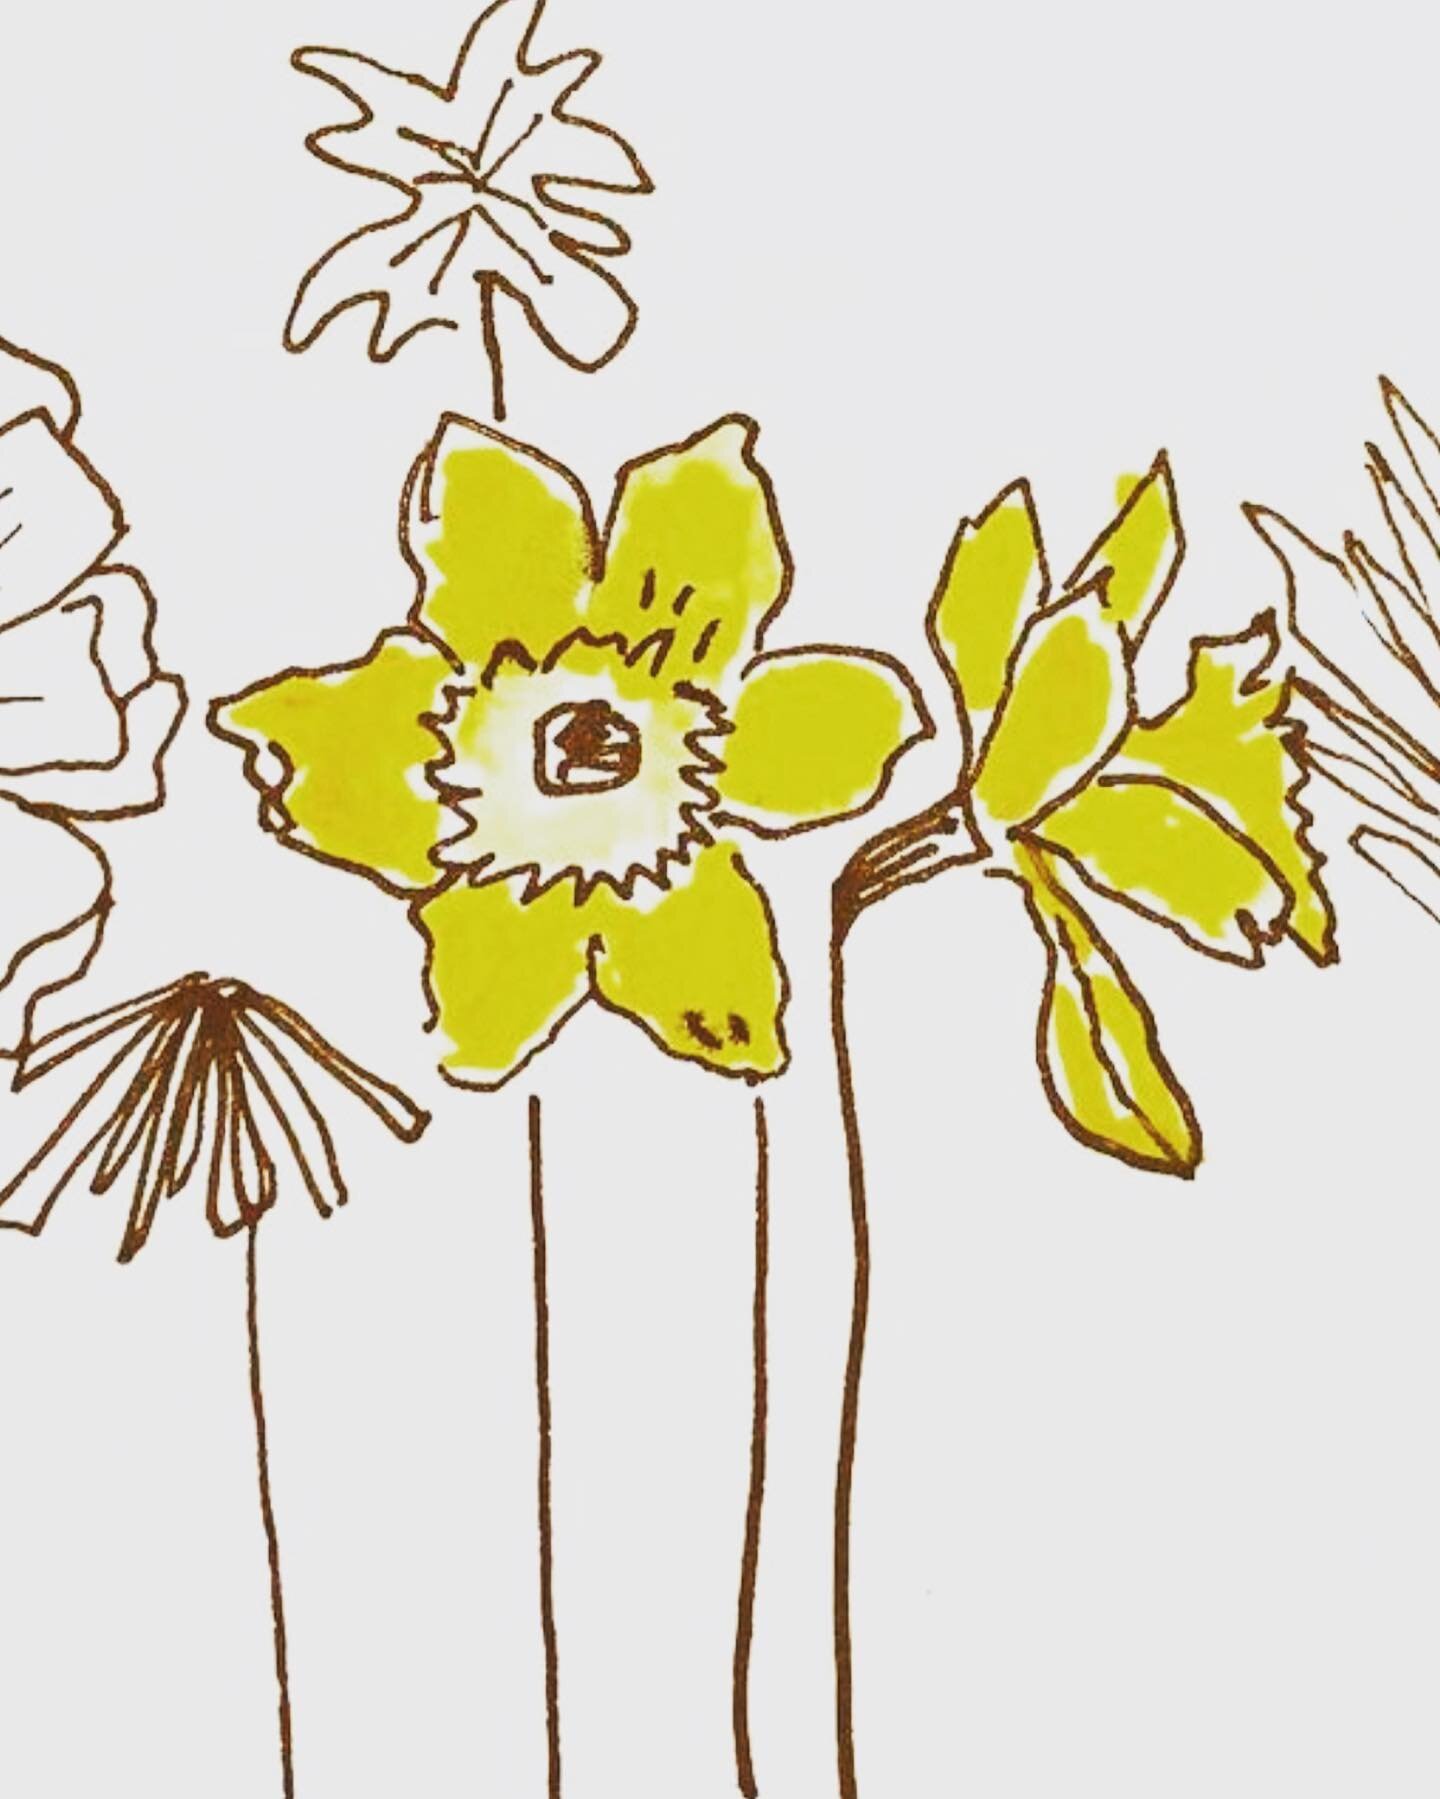 Our daffodils just popped up overnight it feels like! These sunny little flowers are fun to sketch and wave in the wind.